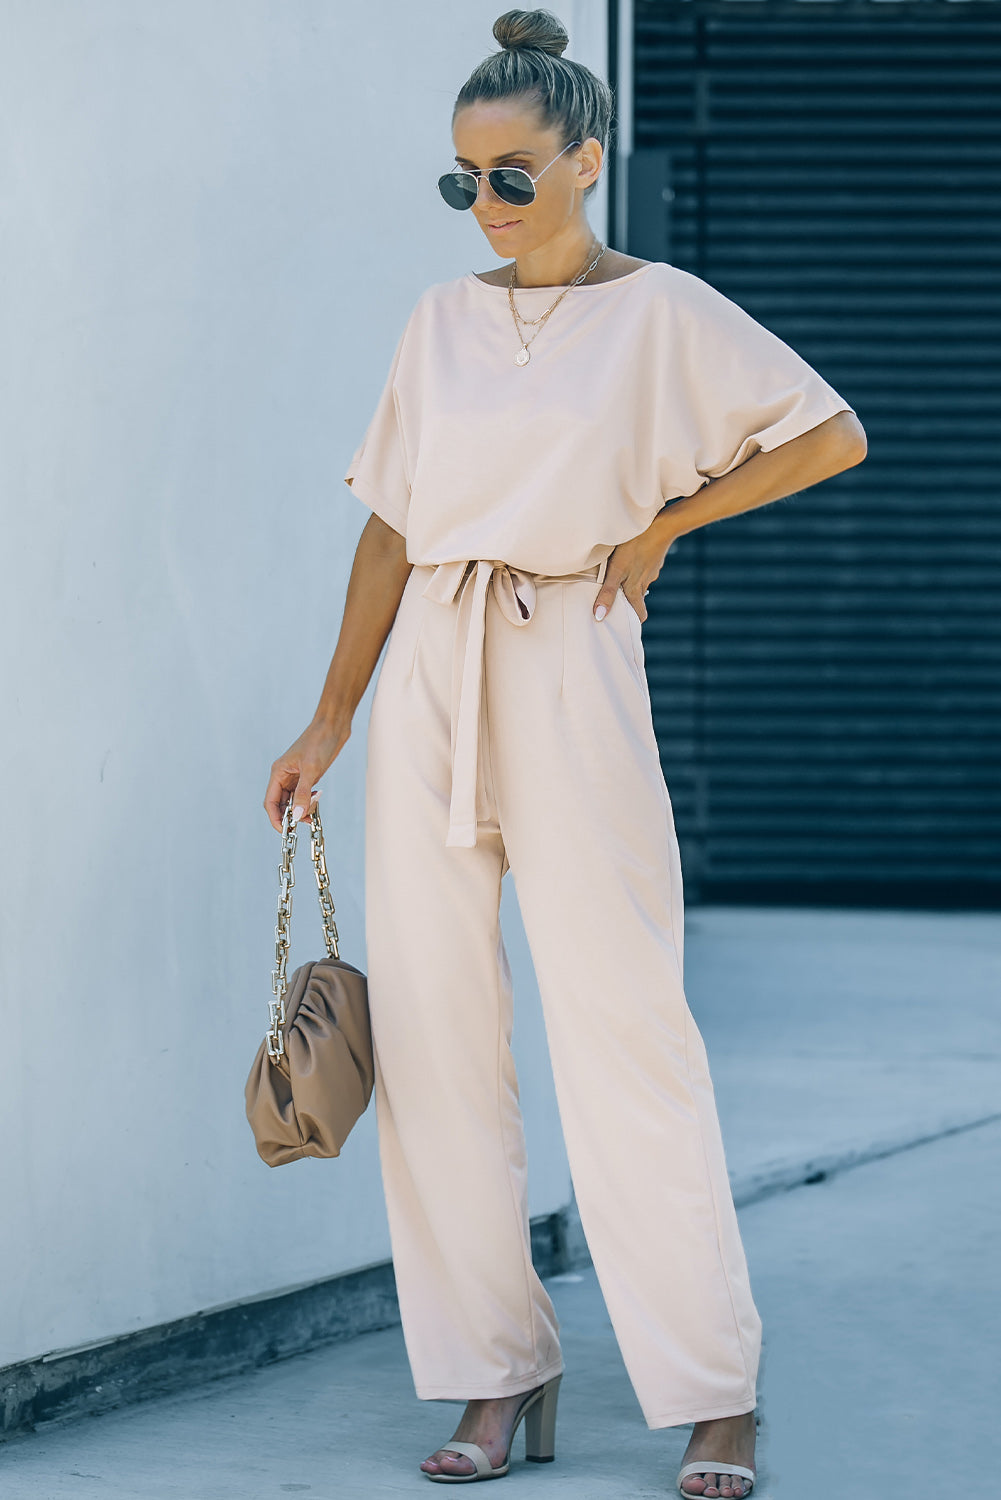 Gray Oh So Glam Belted Wide Leg Jumpsuit